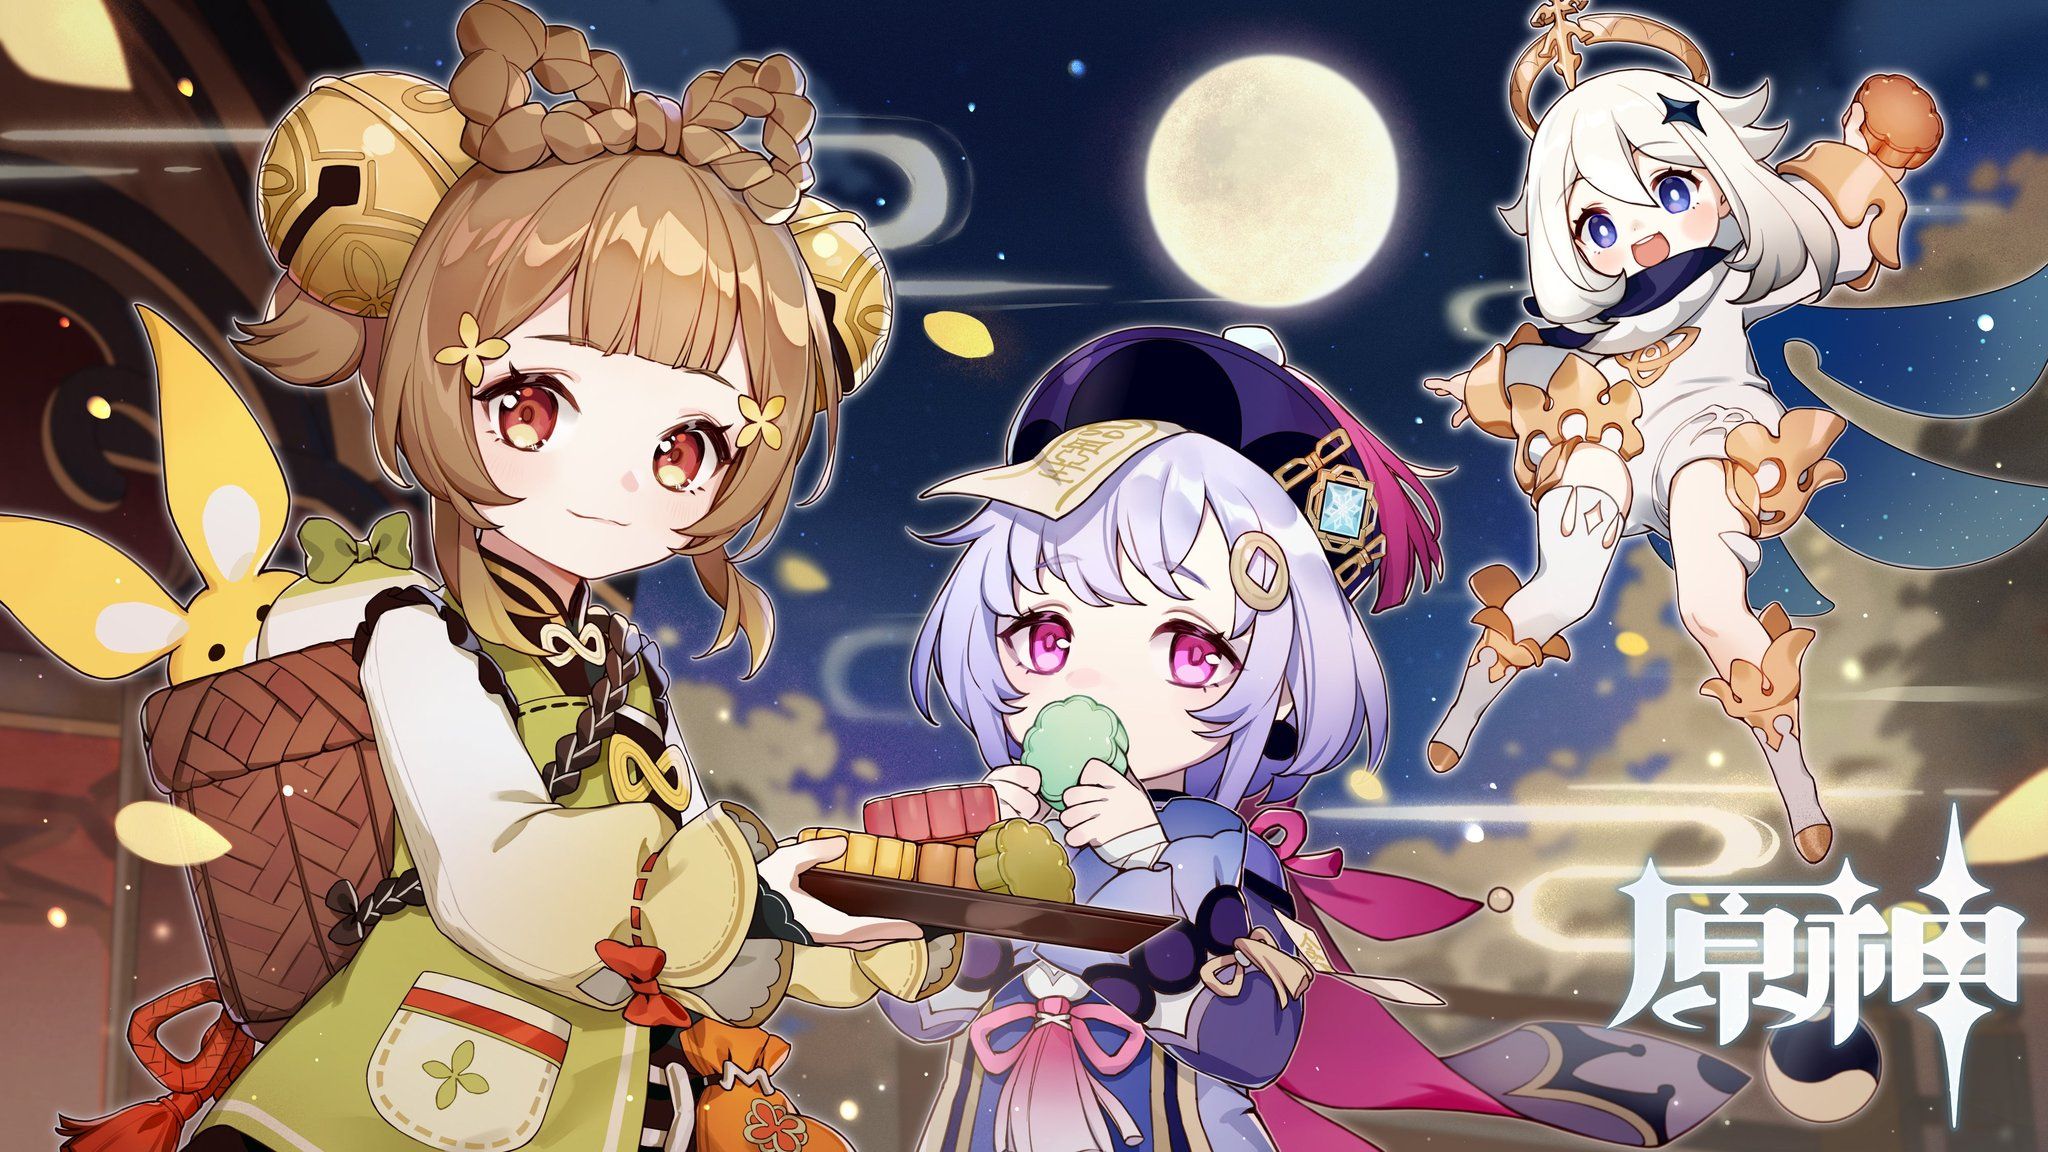 Zeniet Art From Genshin Impact Qiqi And YaoYao Celebrating In A Mid Autumn Festival! Yaoyao Is A Dendro Element Character That Wields A Catalyst (CBT Datamine Info) #GenshinImpact #原神